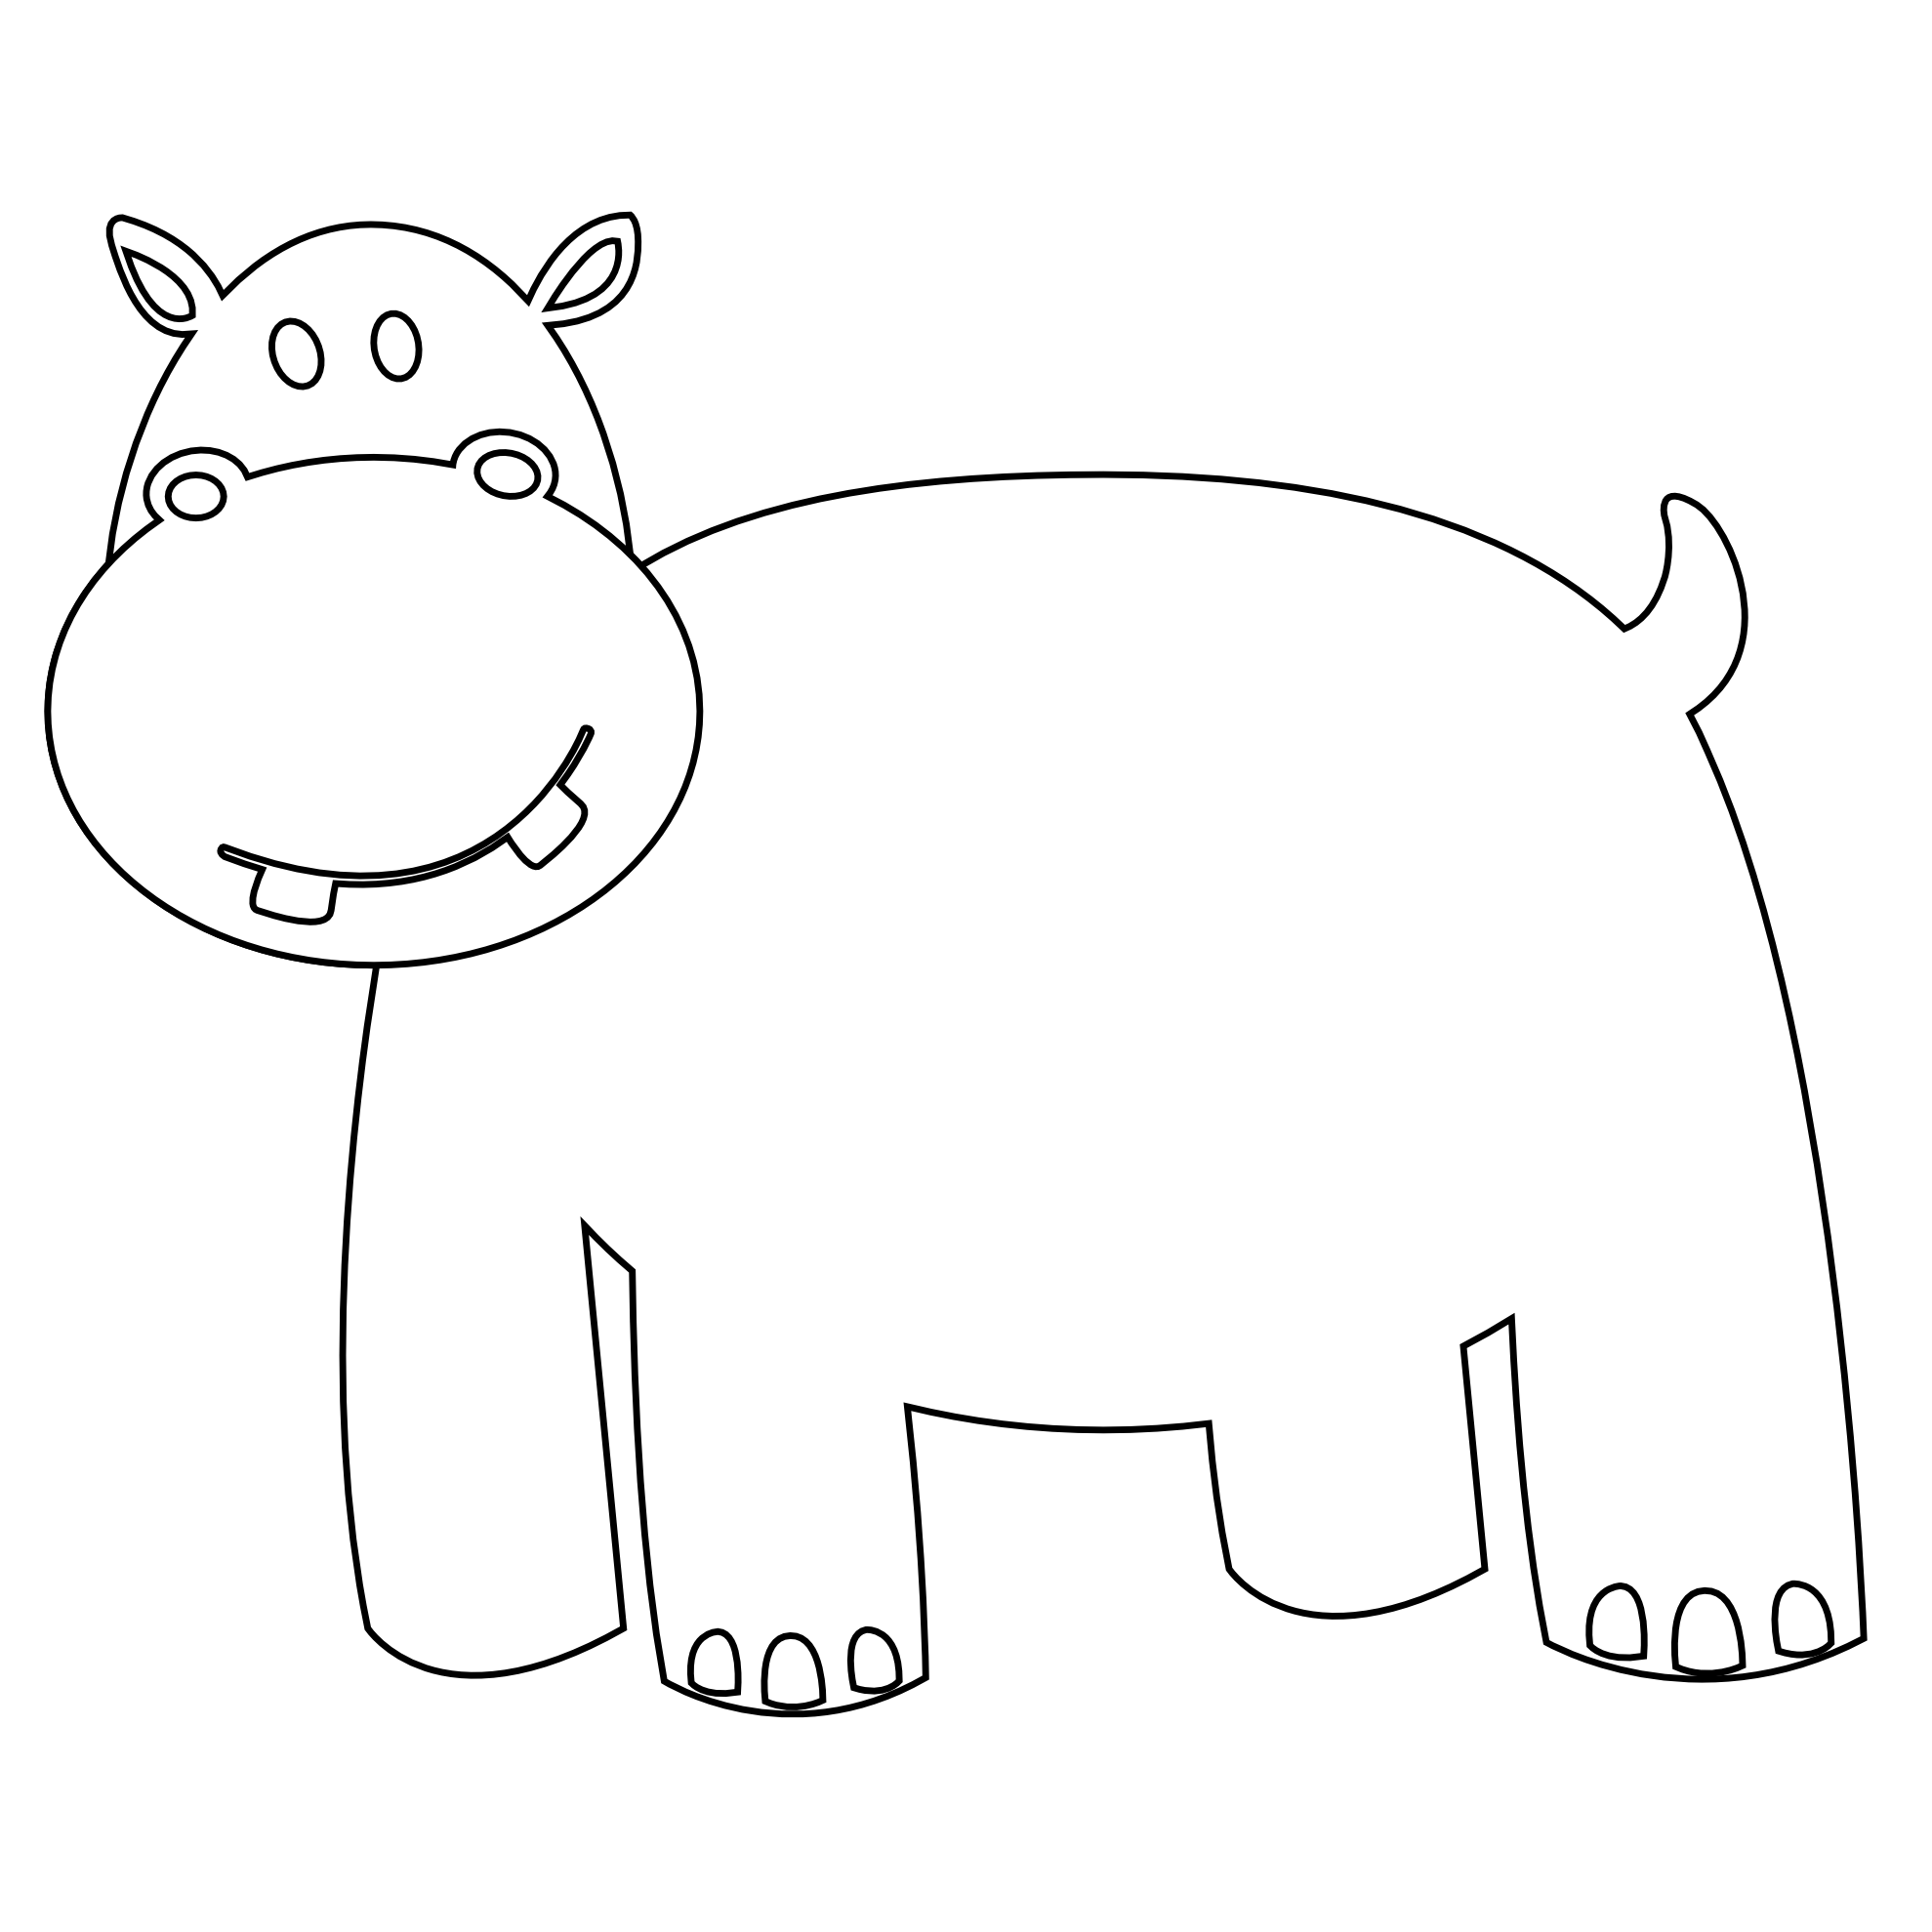 Colorful Animal Hippo Black White Line Art Coloring Book Colouring 